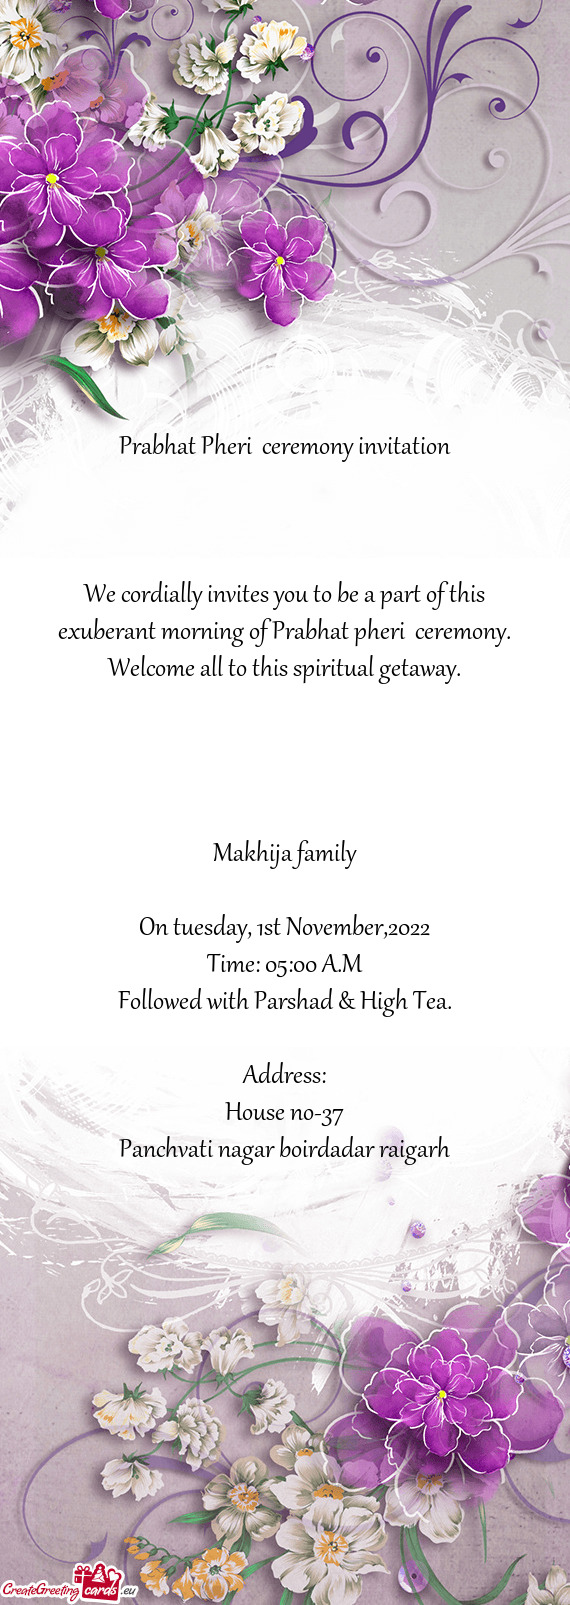 We cordially invites you to be a part of this exuberant morning of Prabhat pheri ceremony. Welcome